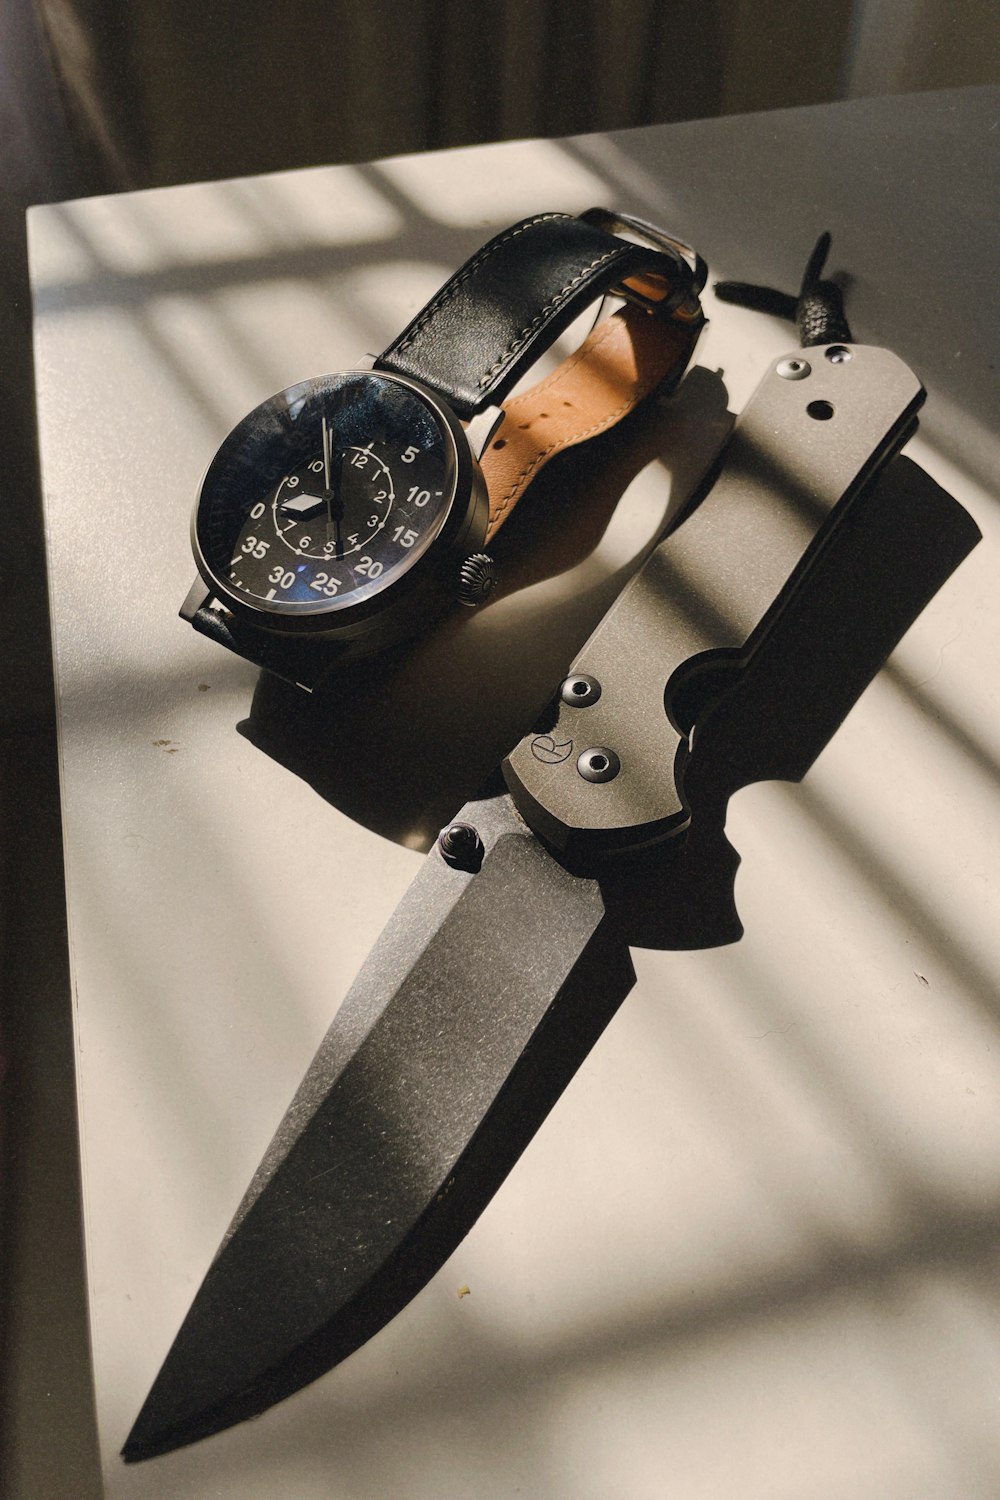 a knife and a watch on a table